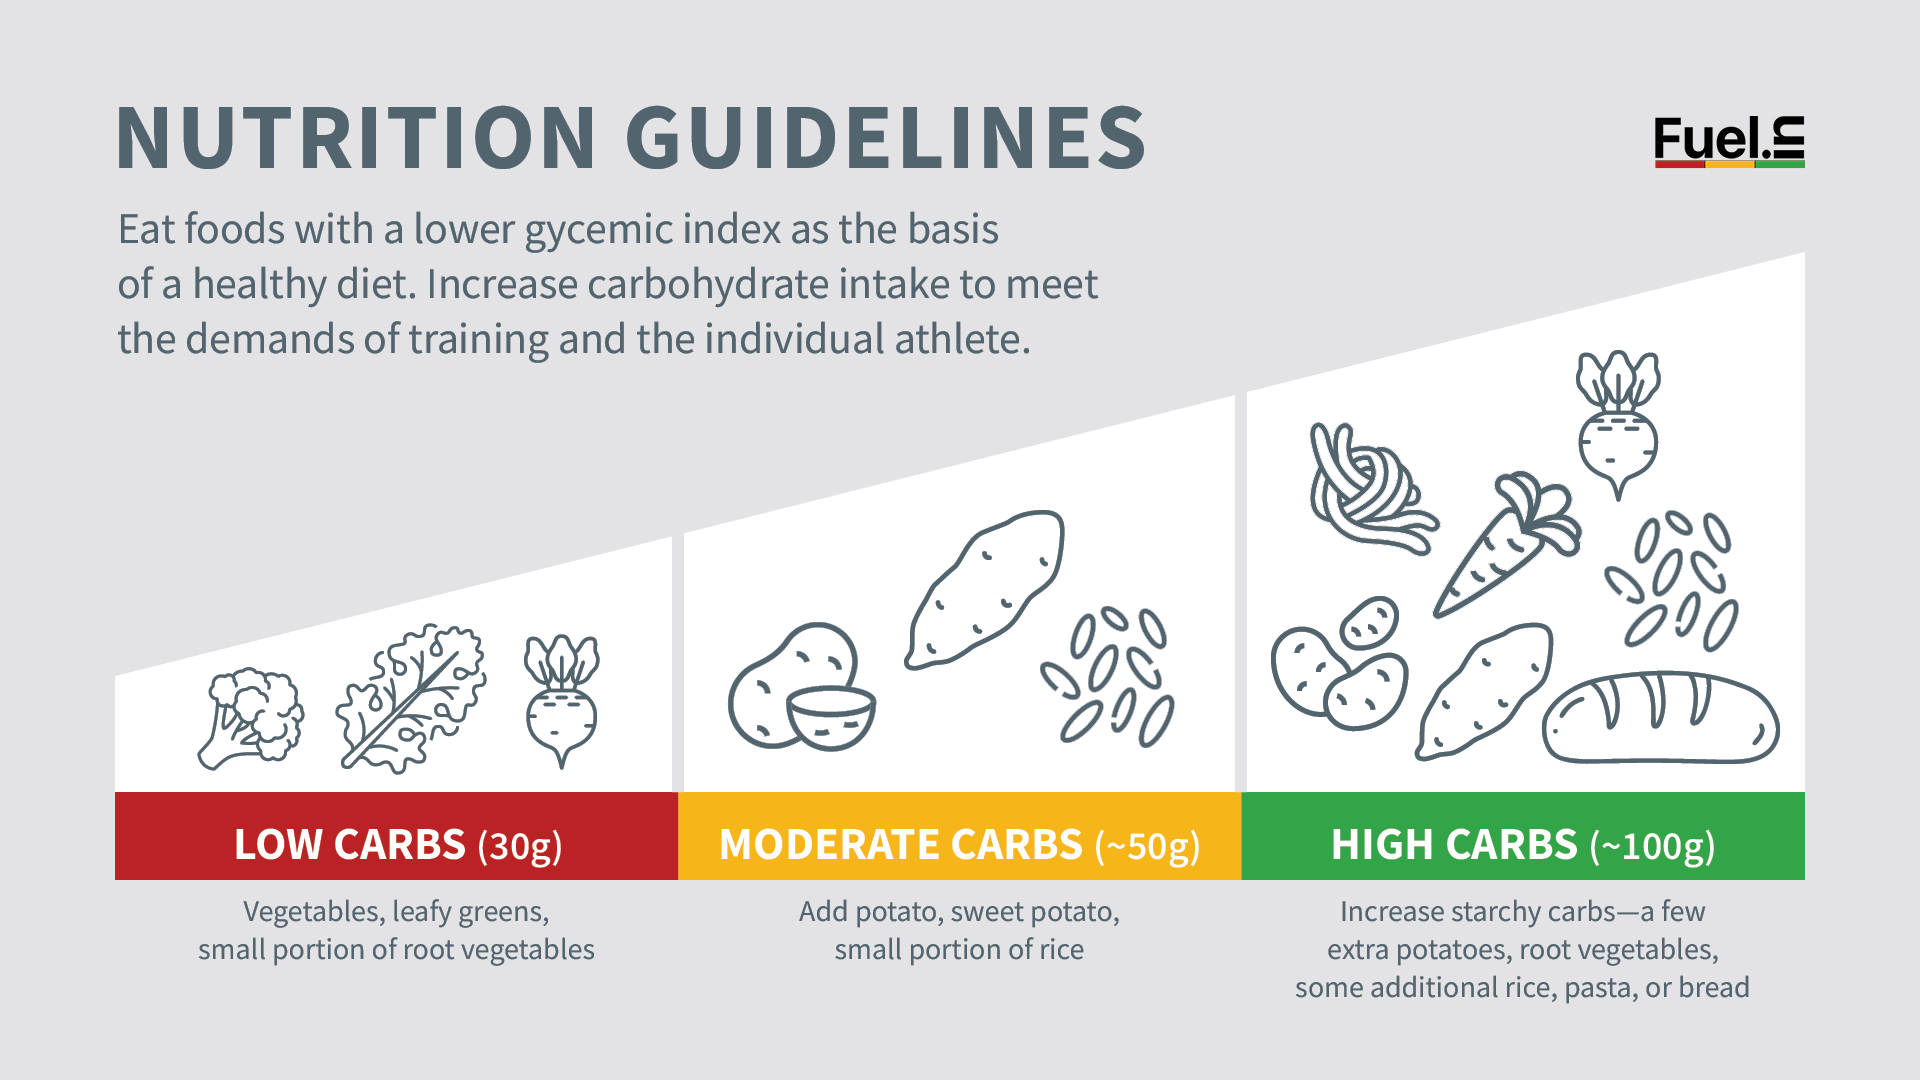 Example of red/yellow/green nutrition guidelines from Fuelin